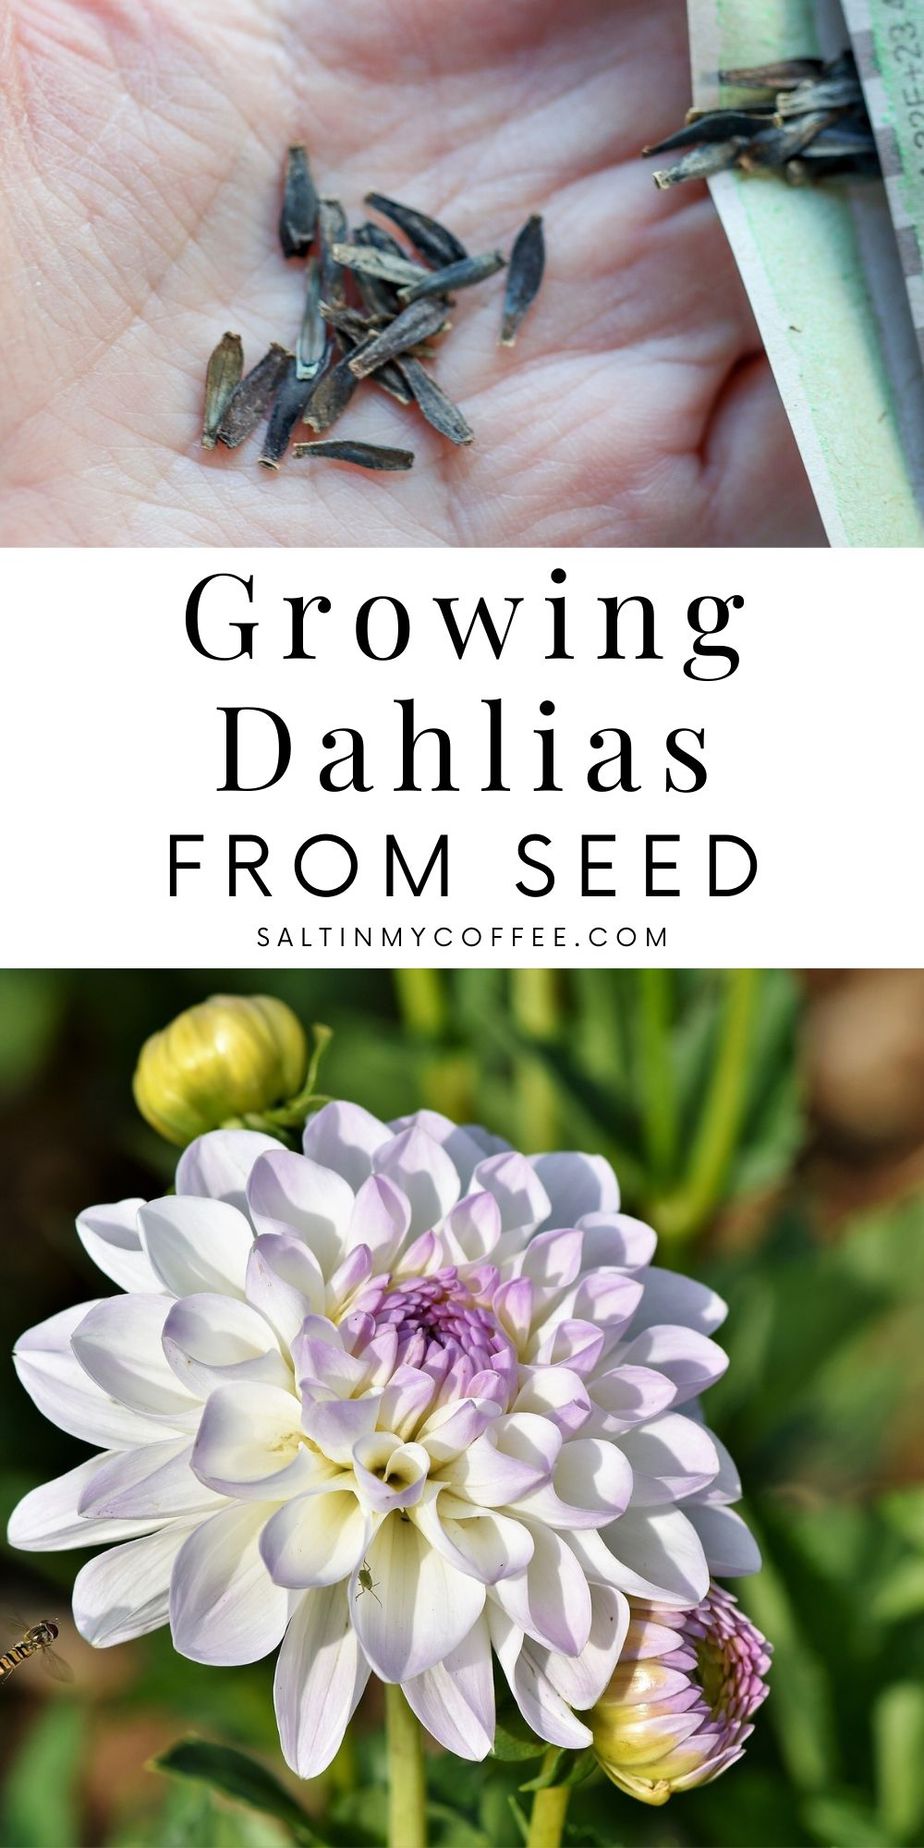 Starting Dahlias From Seed